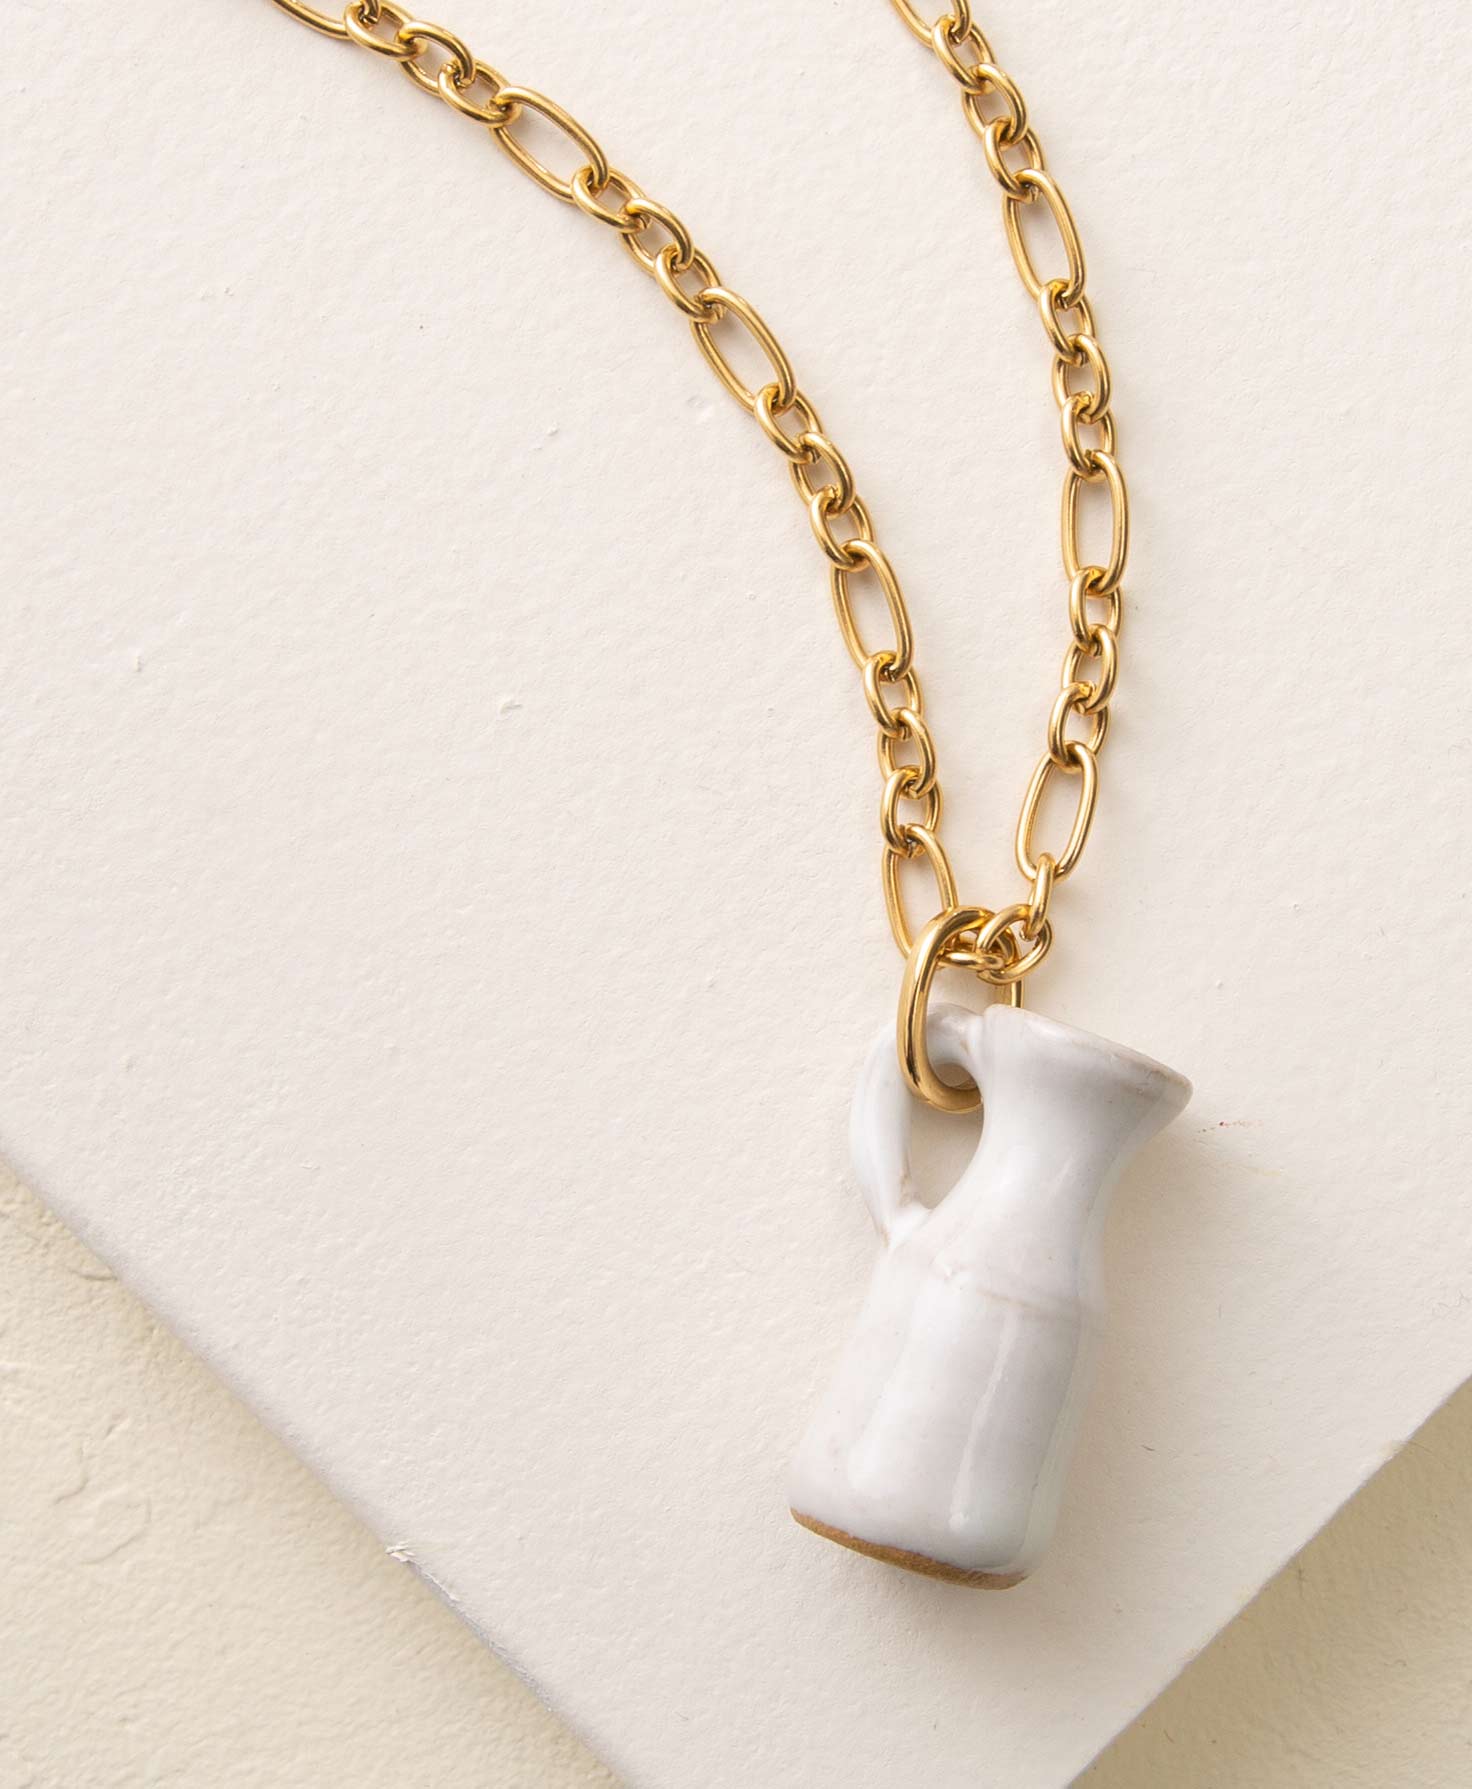 The Petite Pitcher Necklace lays on a white background. It has a chunky gold chain composed of circular and oval-shaped links. At the bottom of the chain is a white porcelain pendant shaped like a rustic pitcher. 